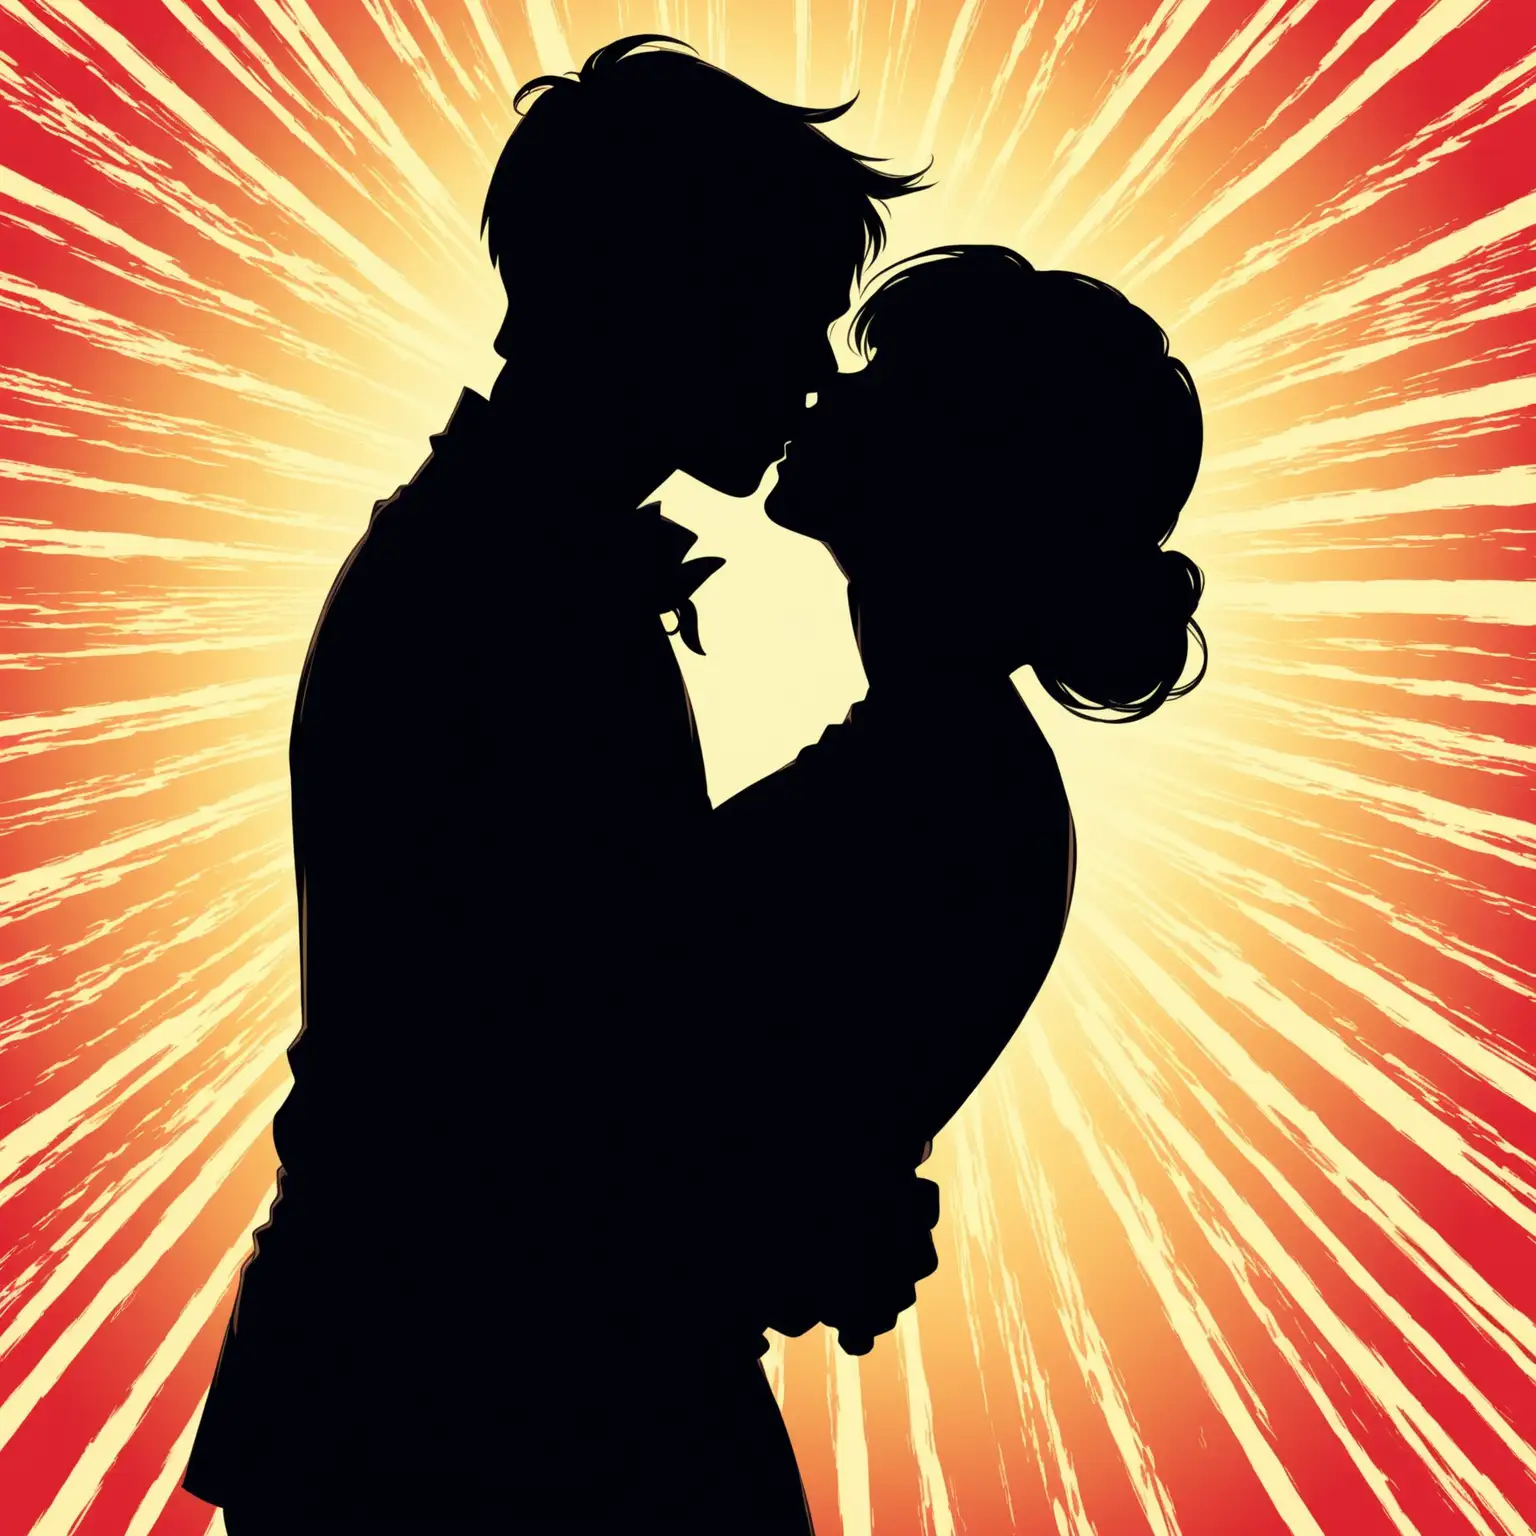 Romantic Couple Silhouette Kissing in Comic Book Style